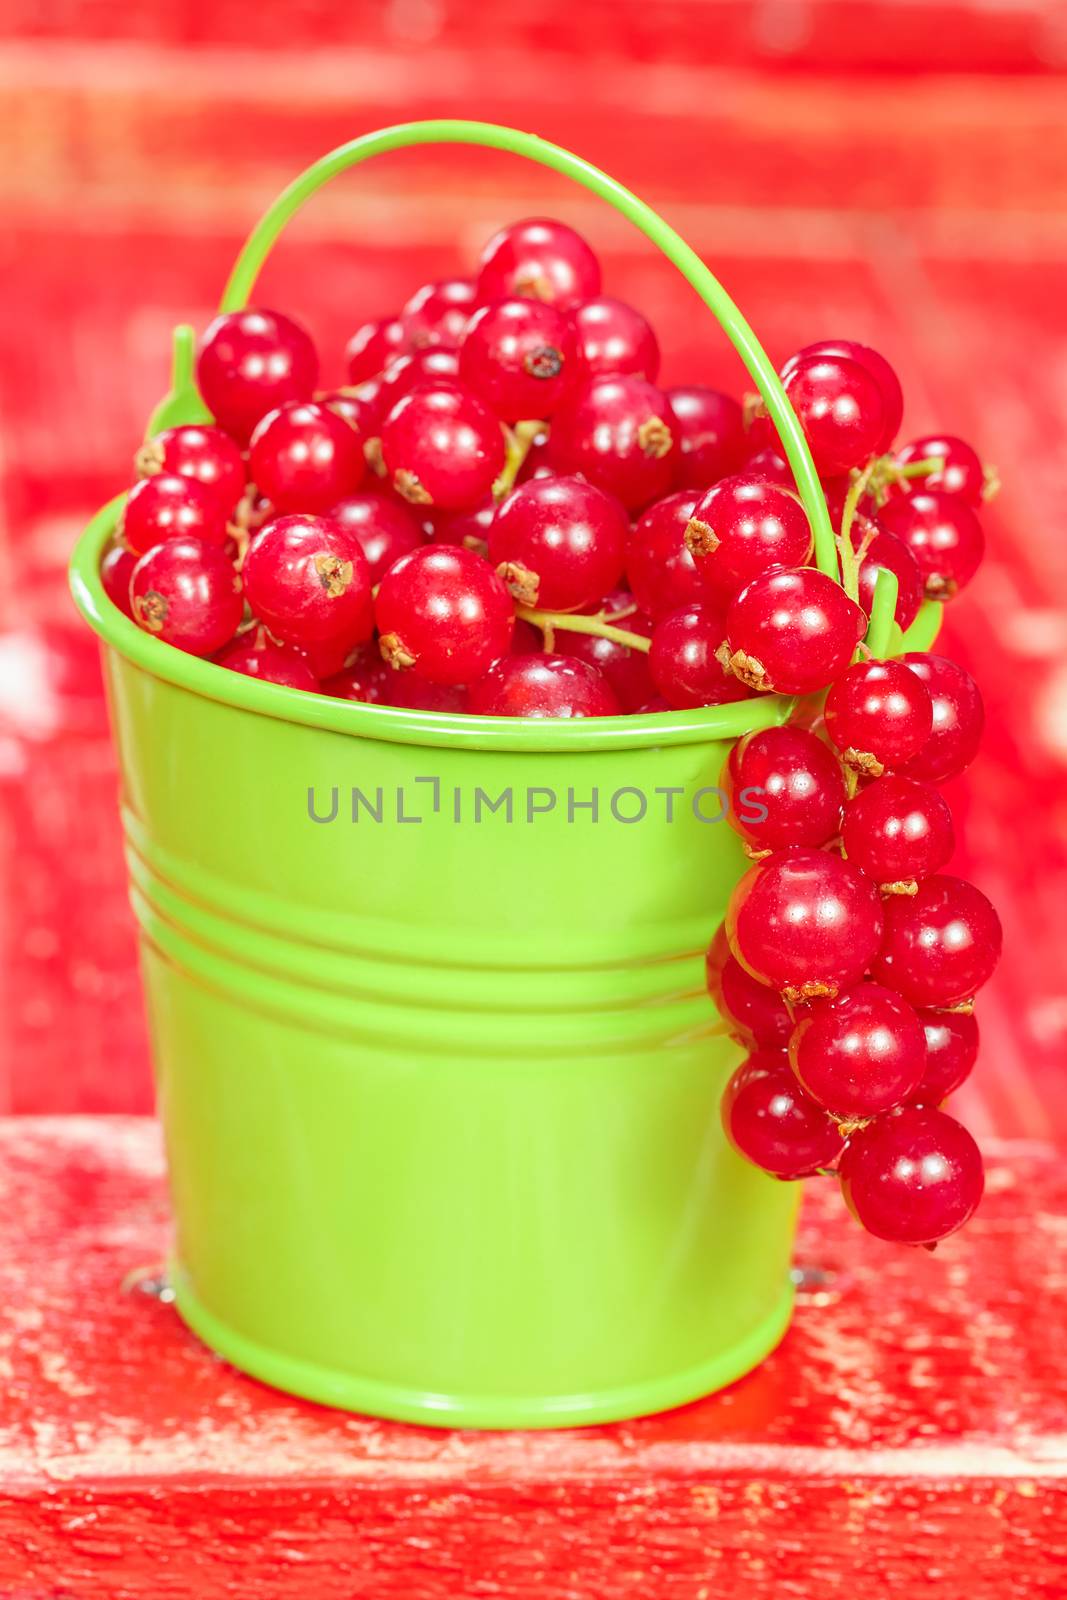 Fresh harvested red currants in small bucket.